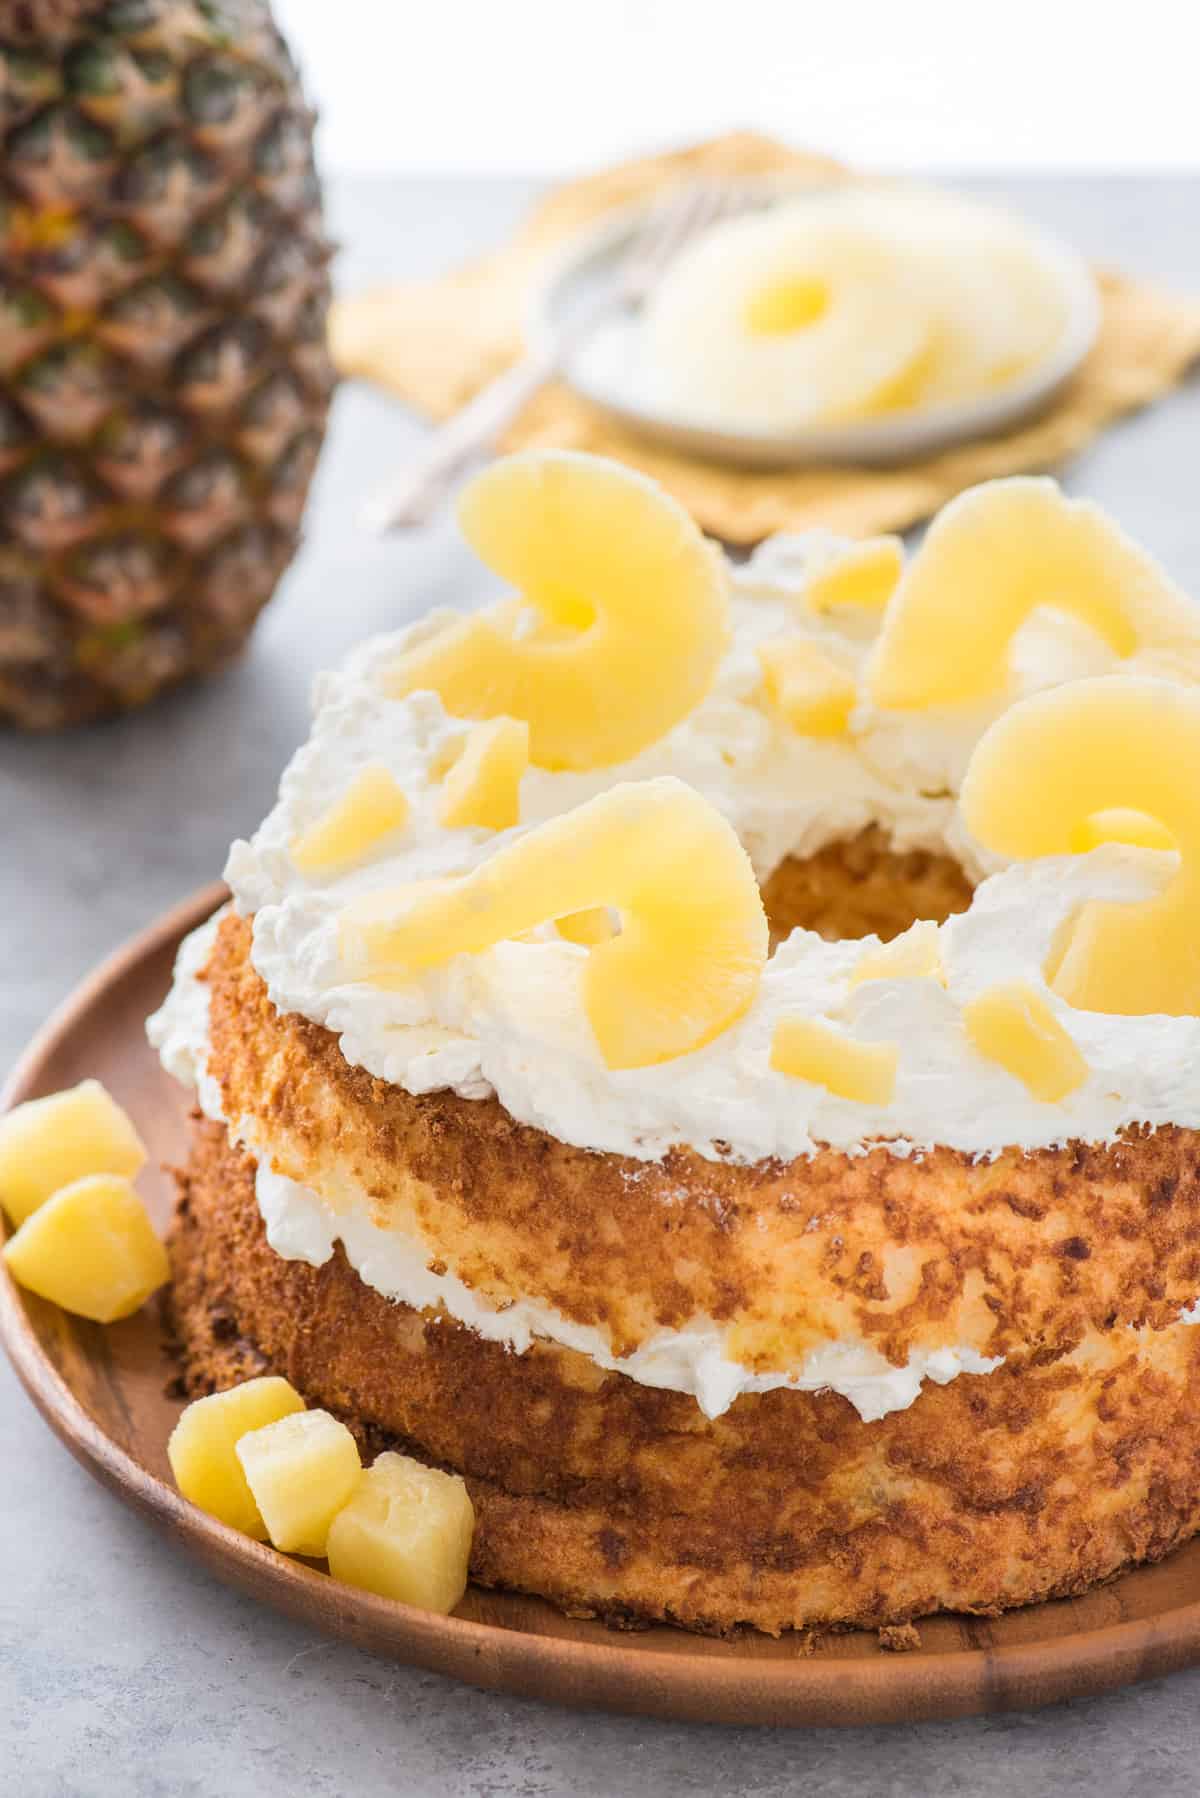 whole angel food cake topped with whipped cream and pineapple slices on wood serving tray on white background